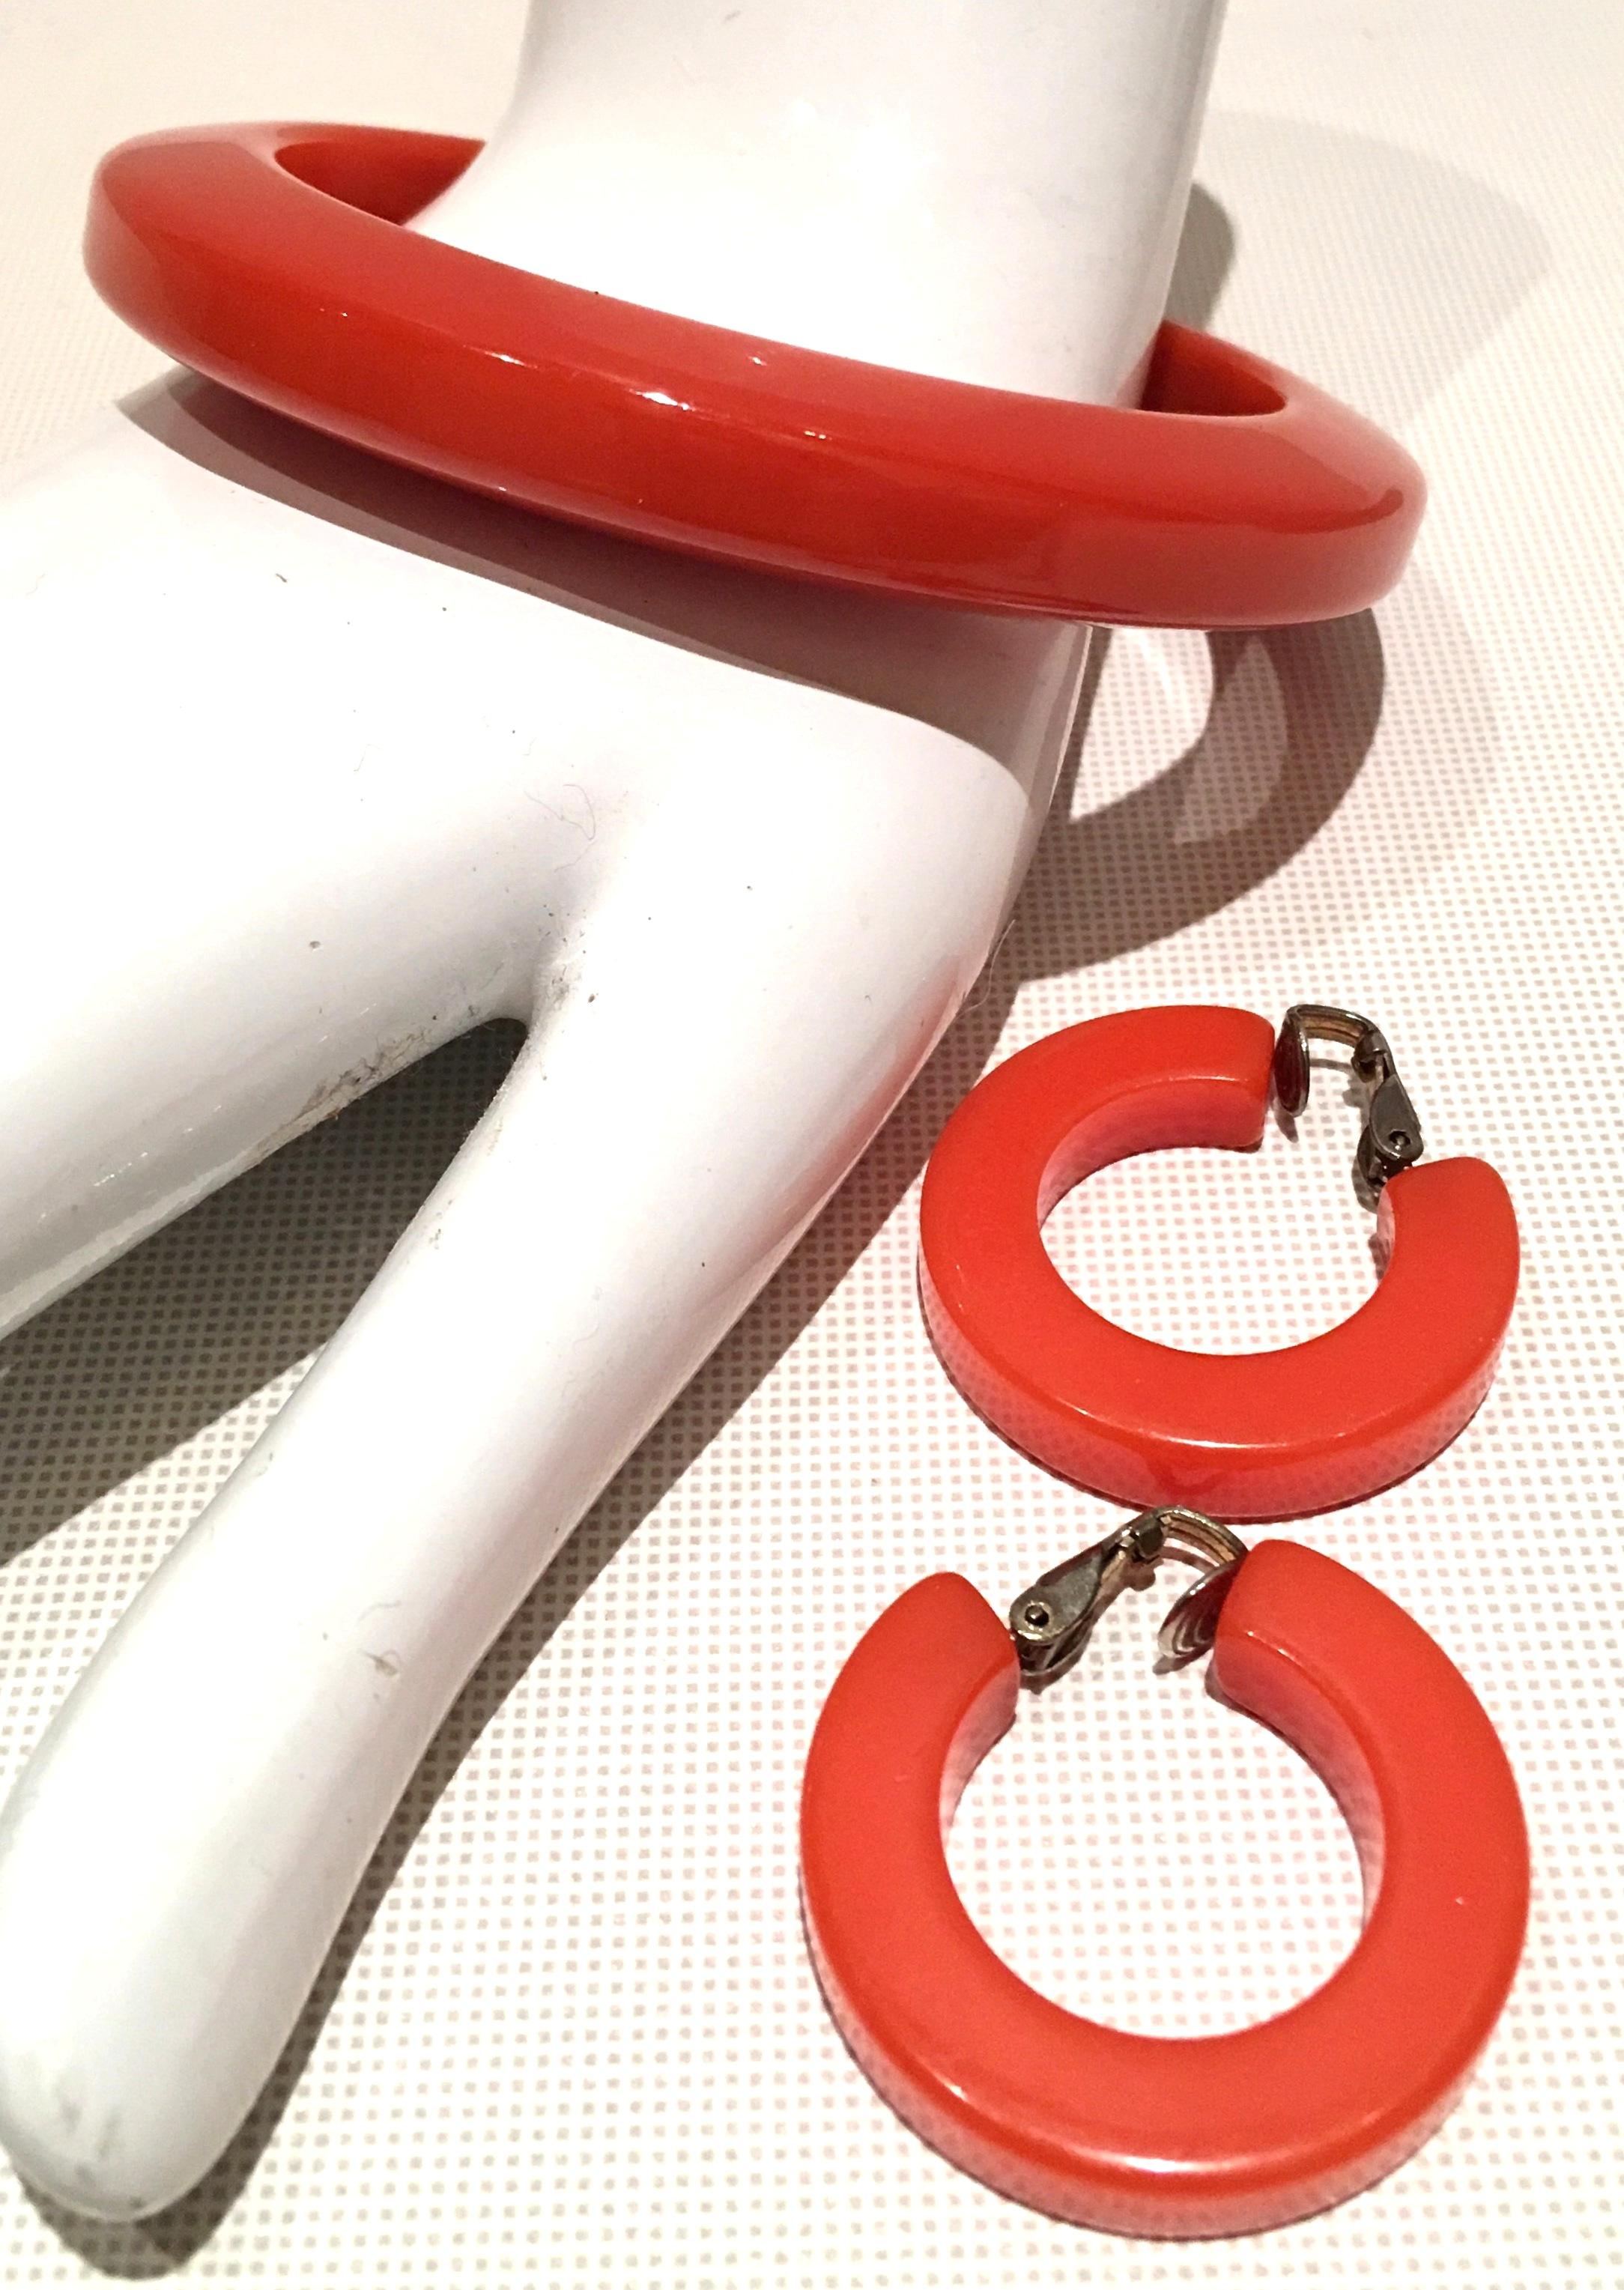 1930'S Art Deco orange Bakelite bangle bracelet and hoop earrings set. Earrings are tubular and clip style with sterling silver detail. The bangle is tubular with rounded edges and has an interior diameter of, 2.5